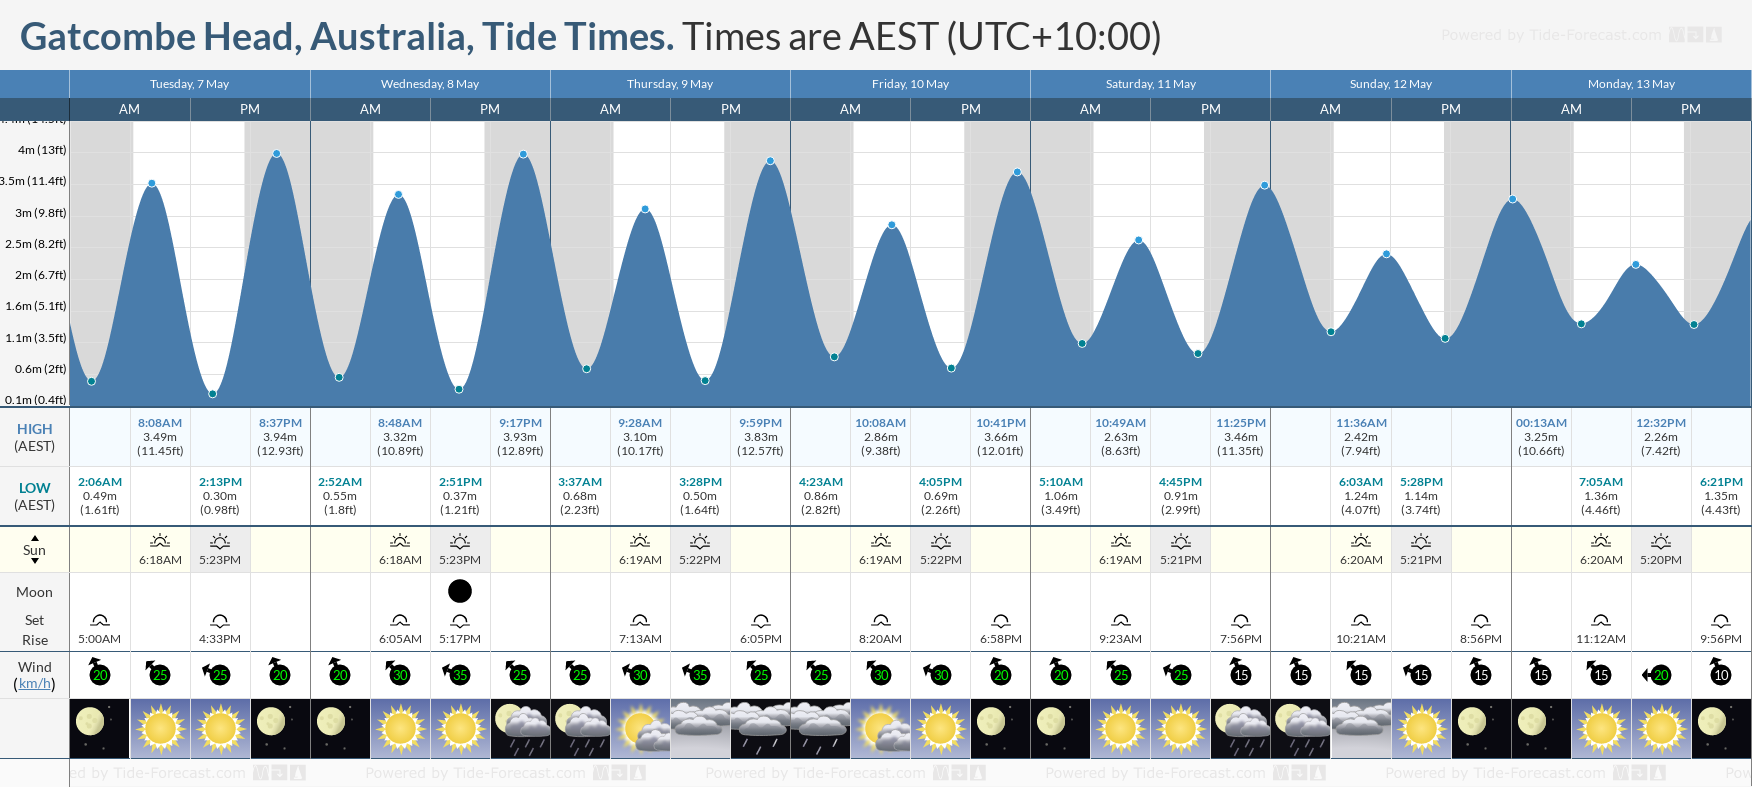 Gatcombe Head, Australia Tide Chart including high and low tide tide times for the next 7 days